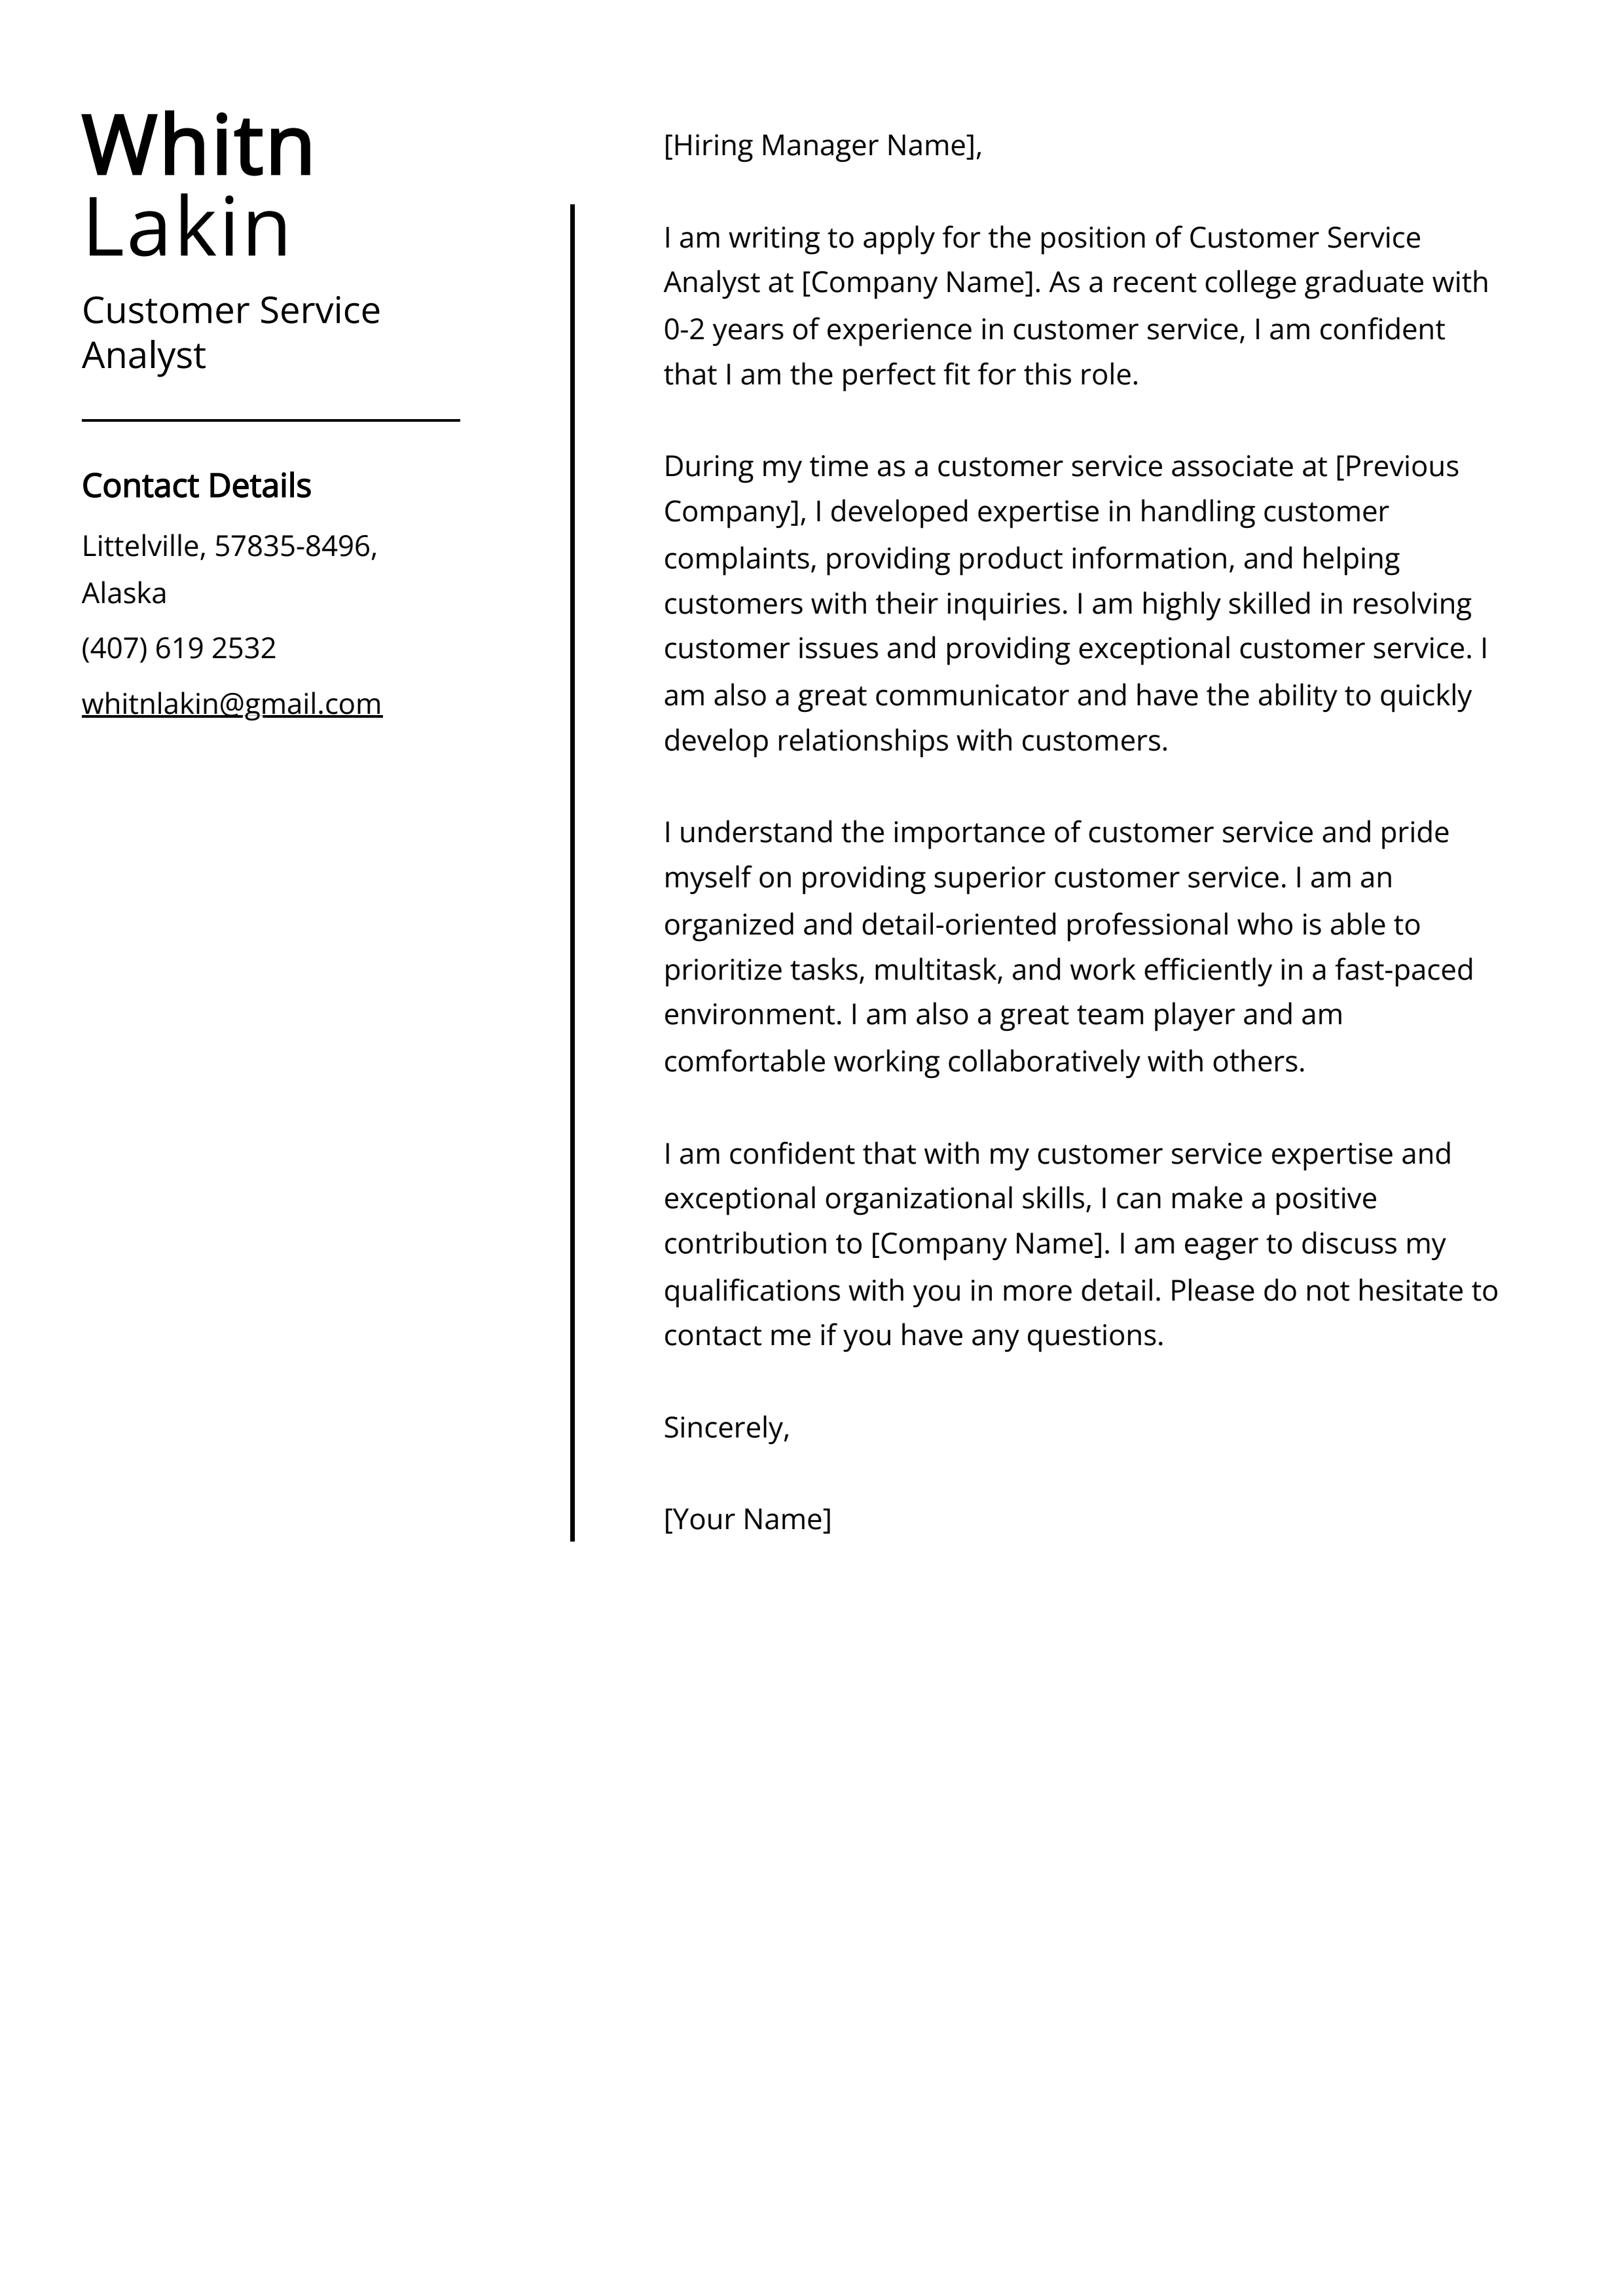 Customer Service Analyst Cover Letter Example